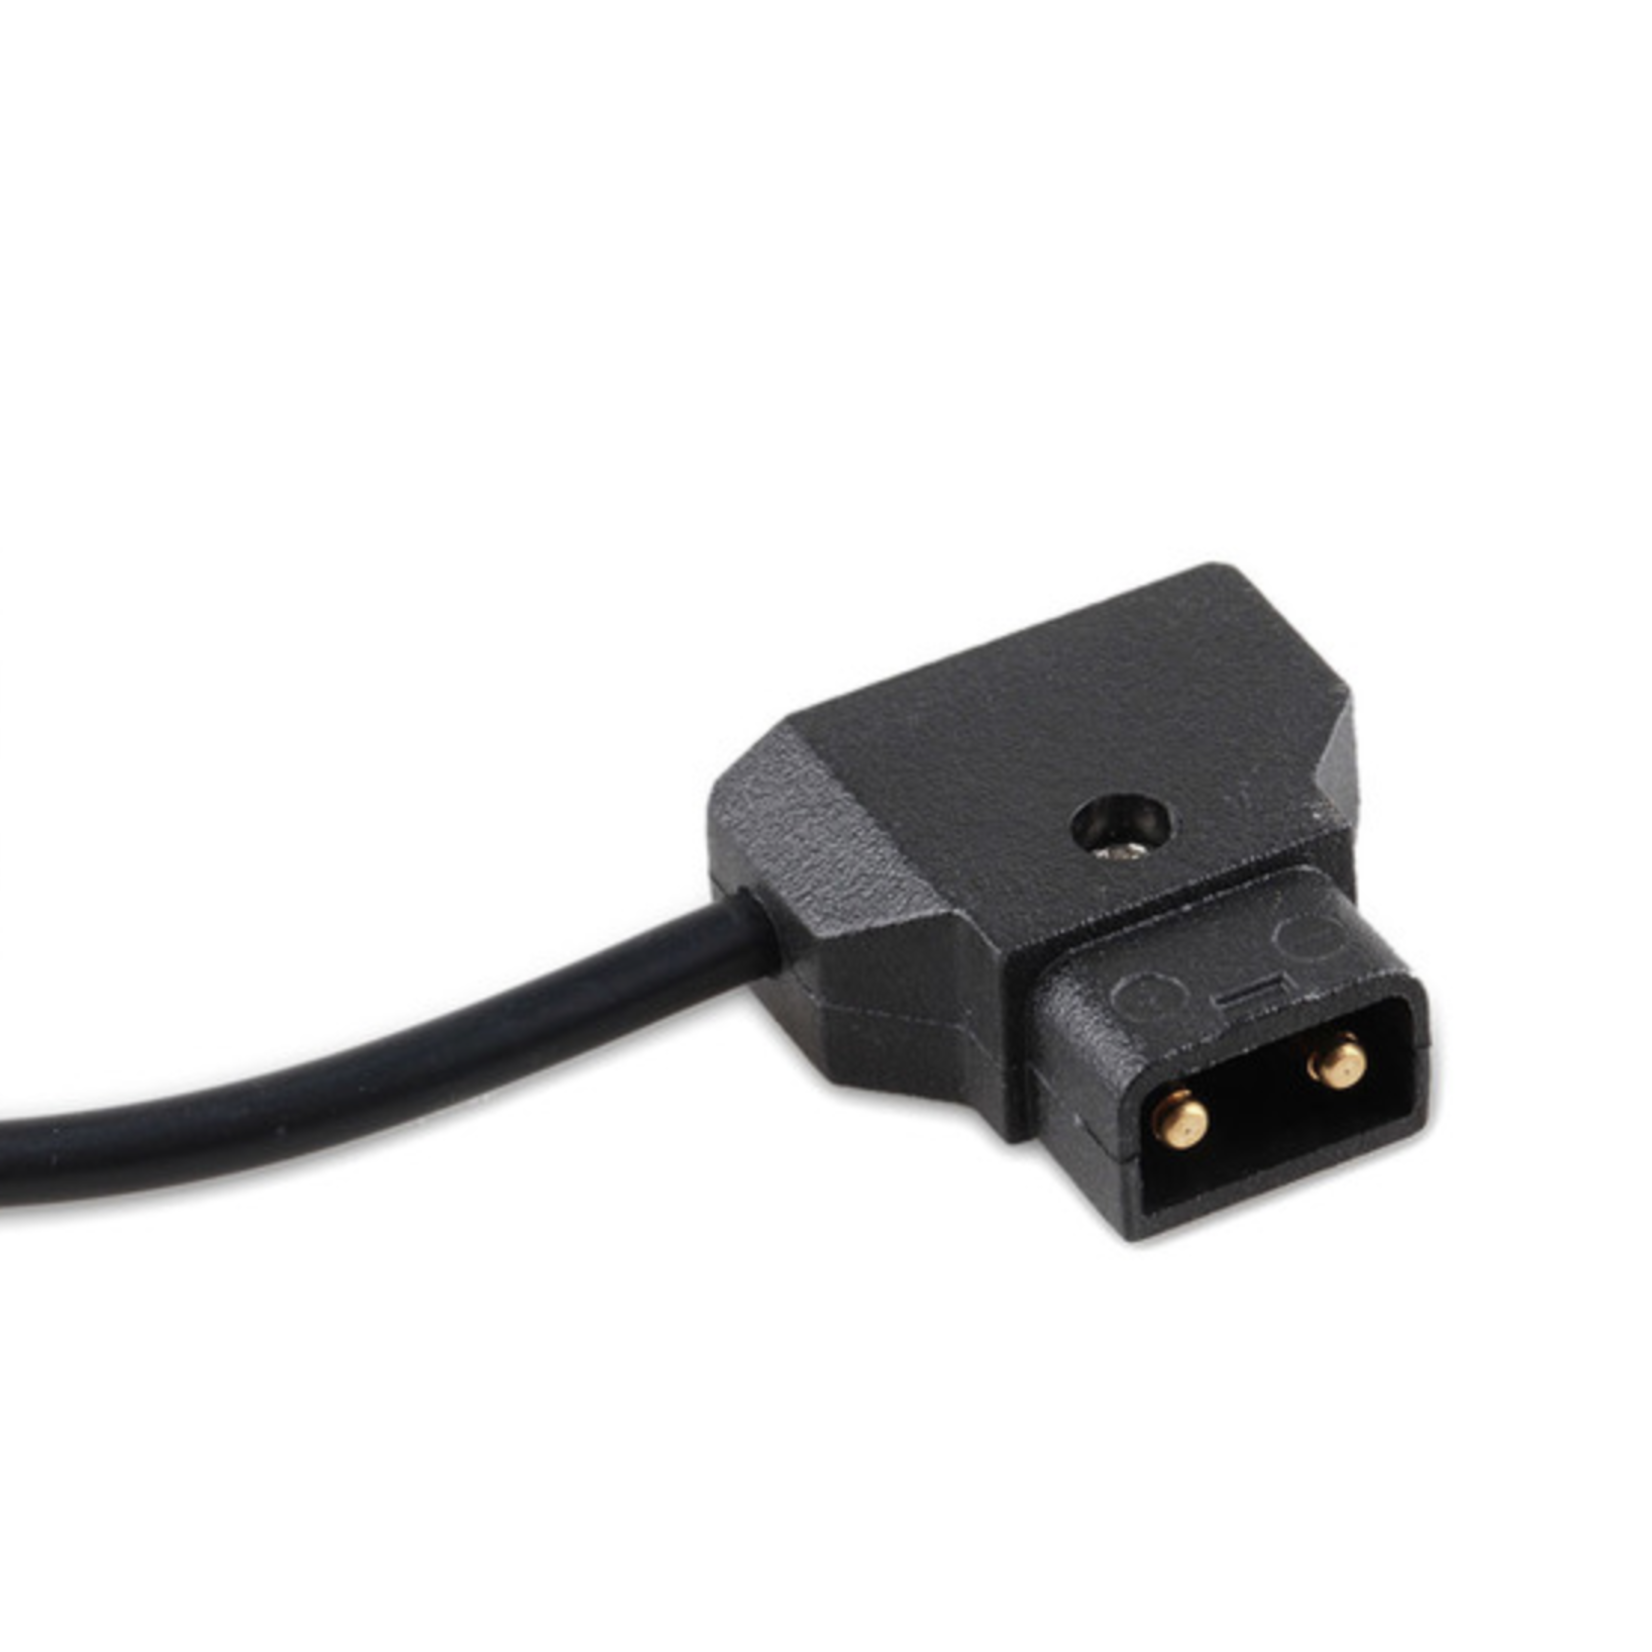 SmallRig SmallRig D-Tap to DC Port Power Cable